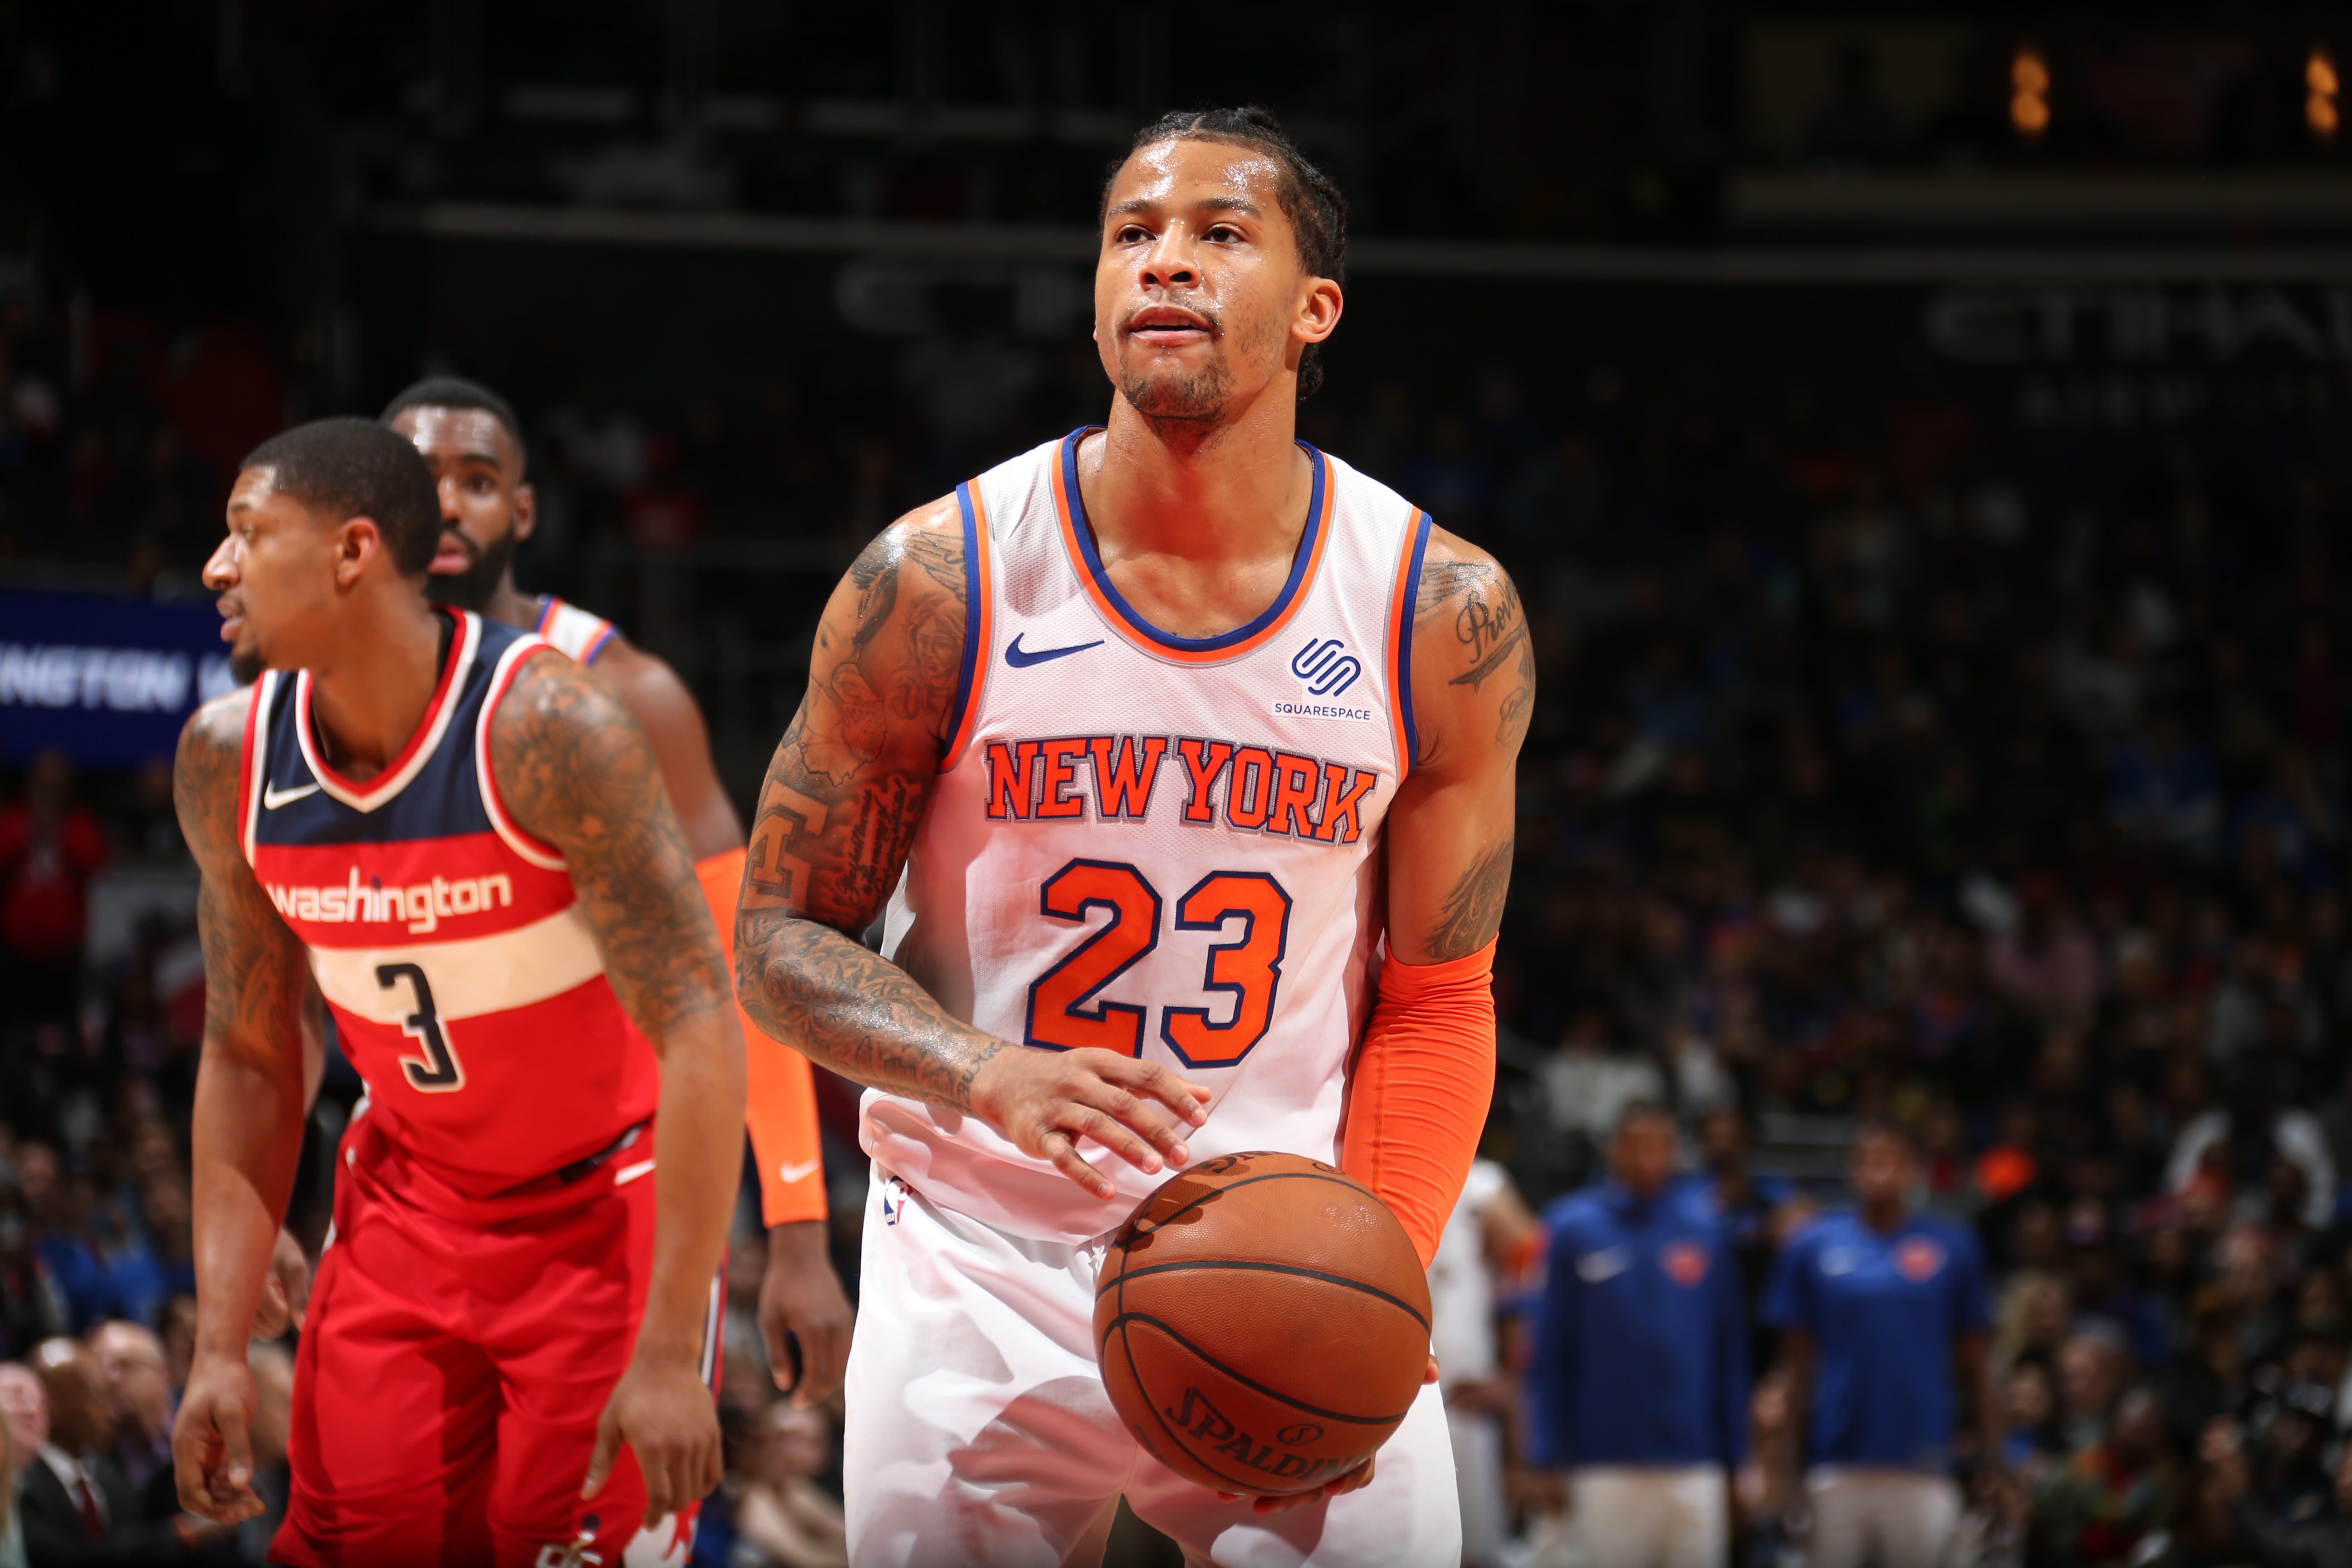 Trey Burke New York Knicks Game-Used #23 White Statement Jersey vs.  Golden State Warriors on January 8 2019 - Size 48